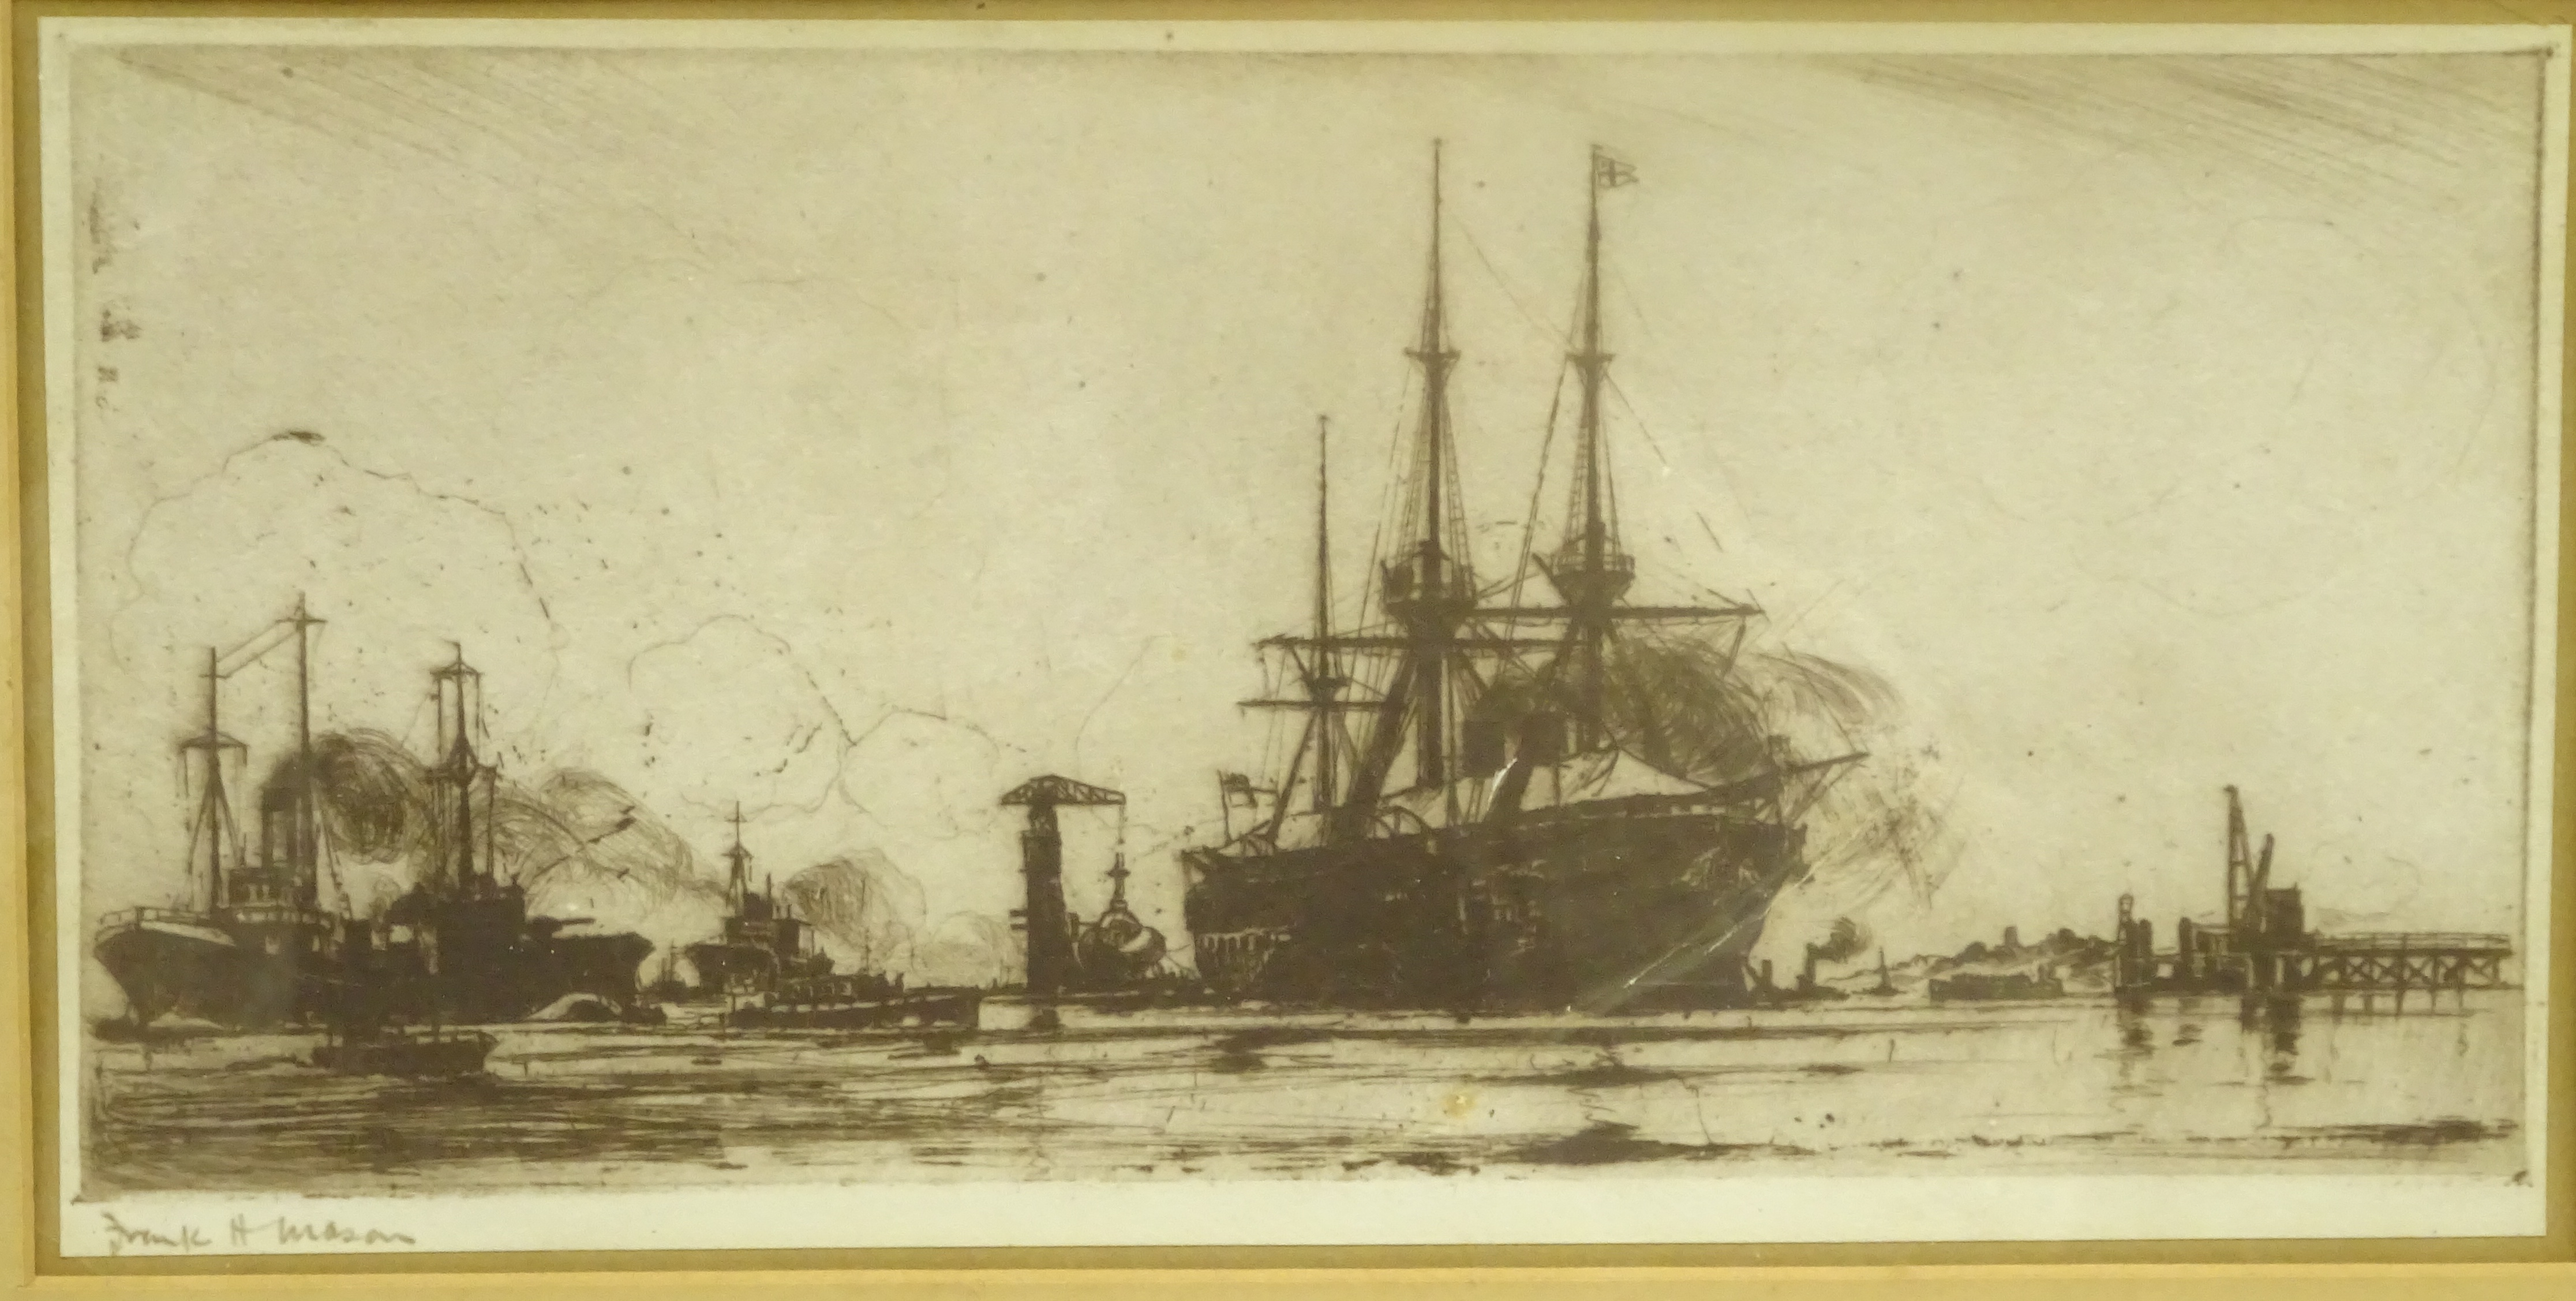 Sail and Steam boats in a busy Port, monochrome print after Frank Henry Mason, 12.